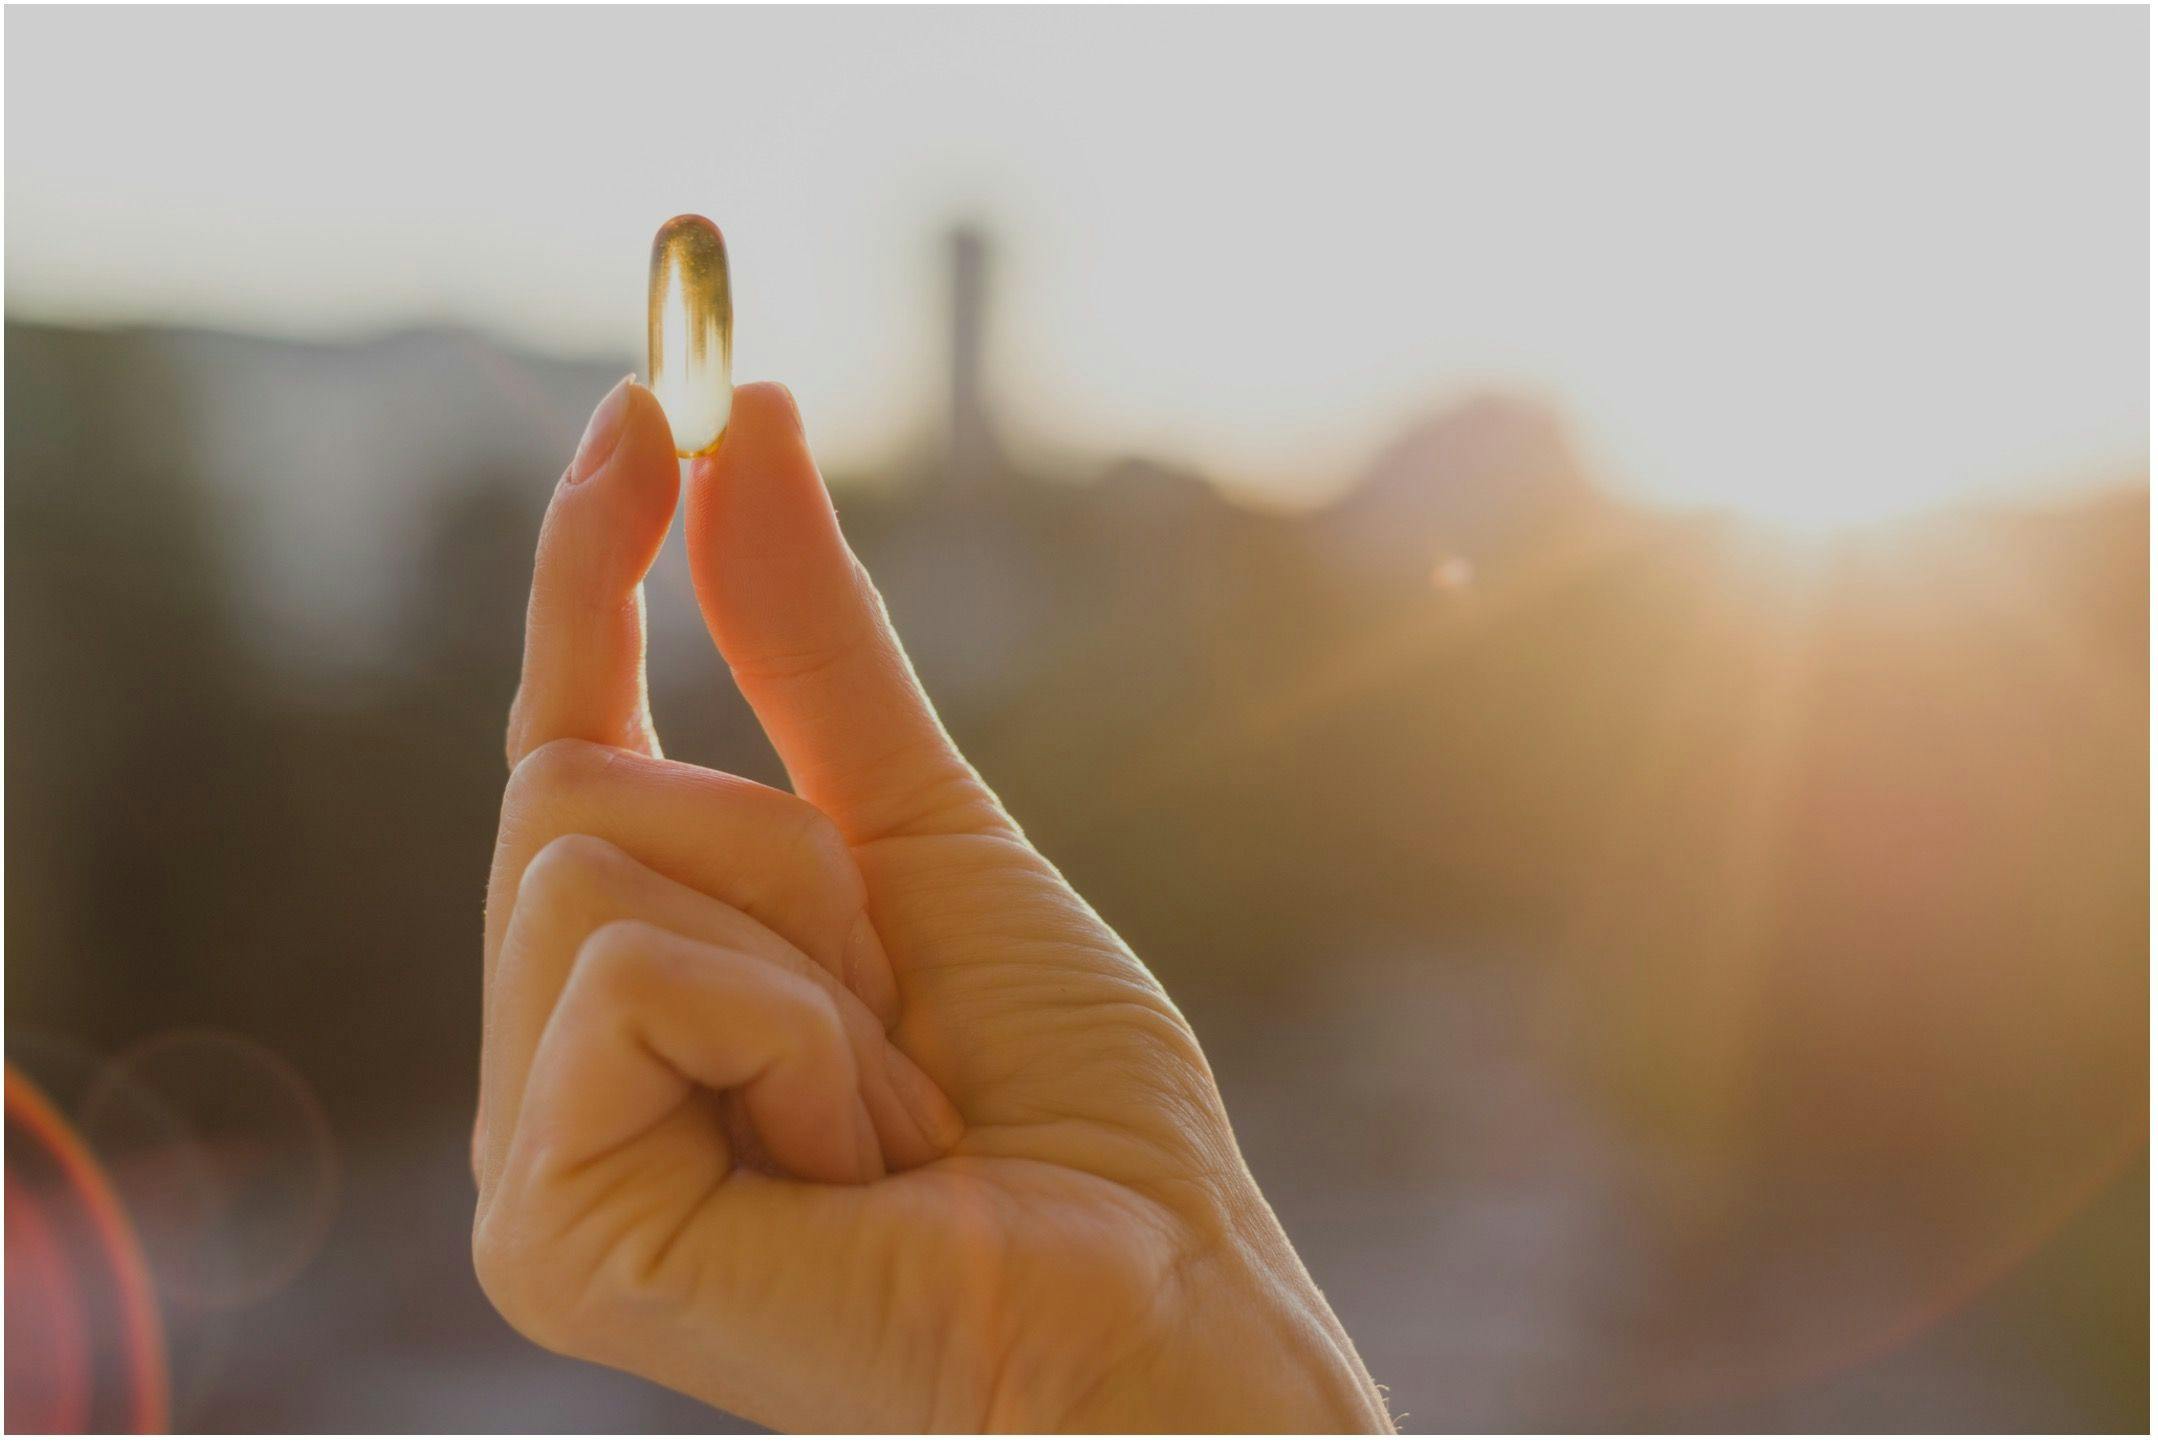 Vitamin D Use Connected to Reduced Risk of Diabetes in Adults with Prediabetes